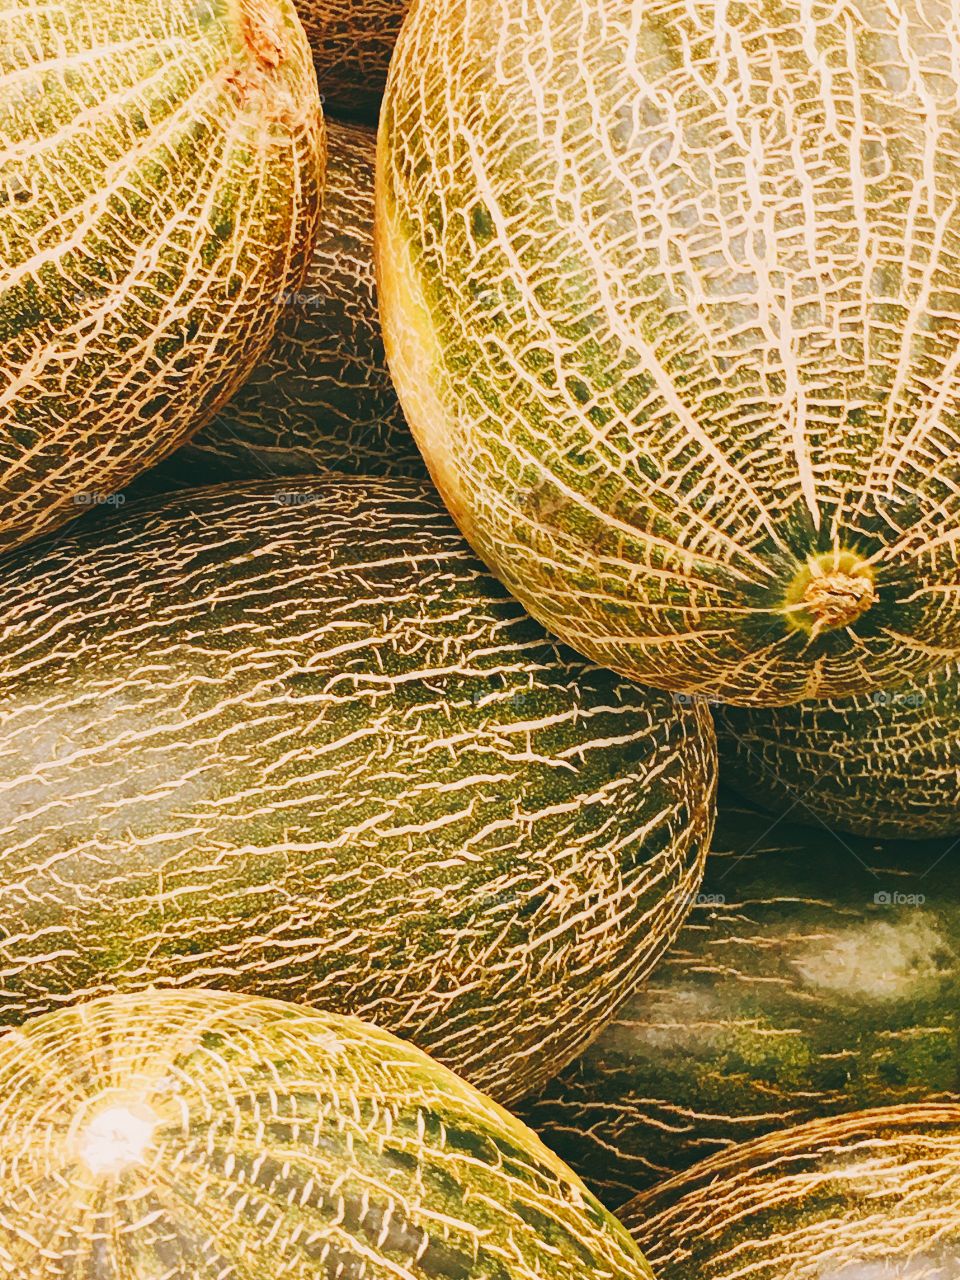 Fresh melons in the market